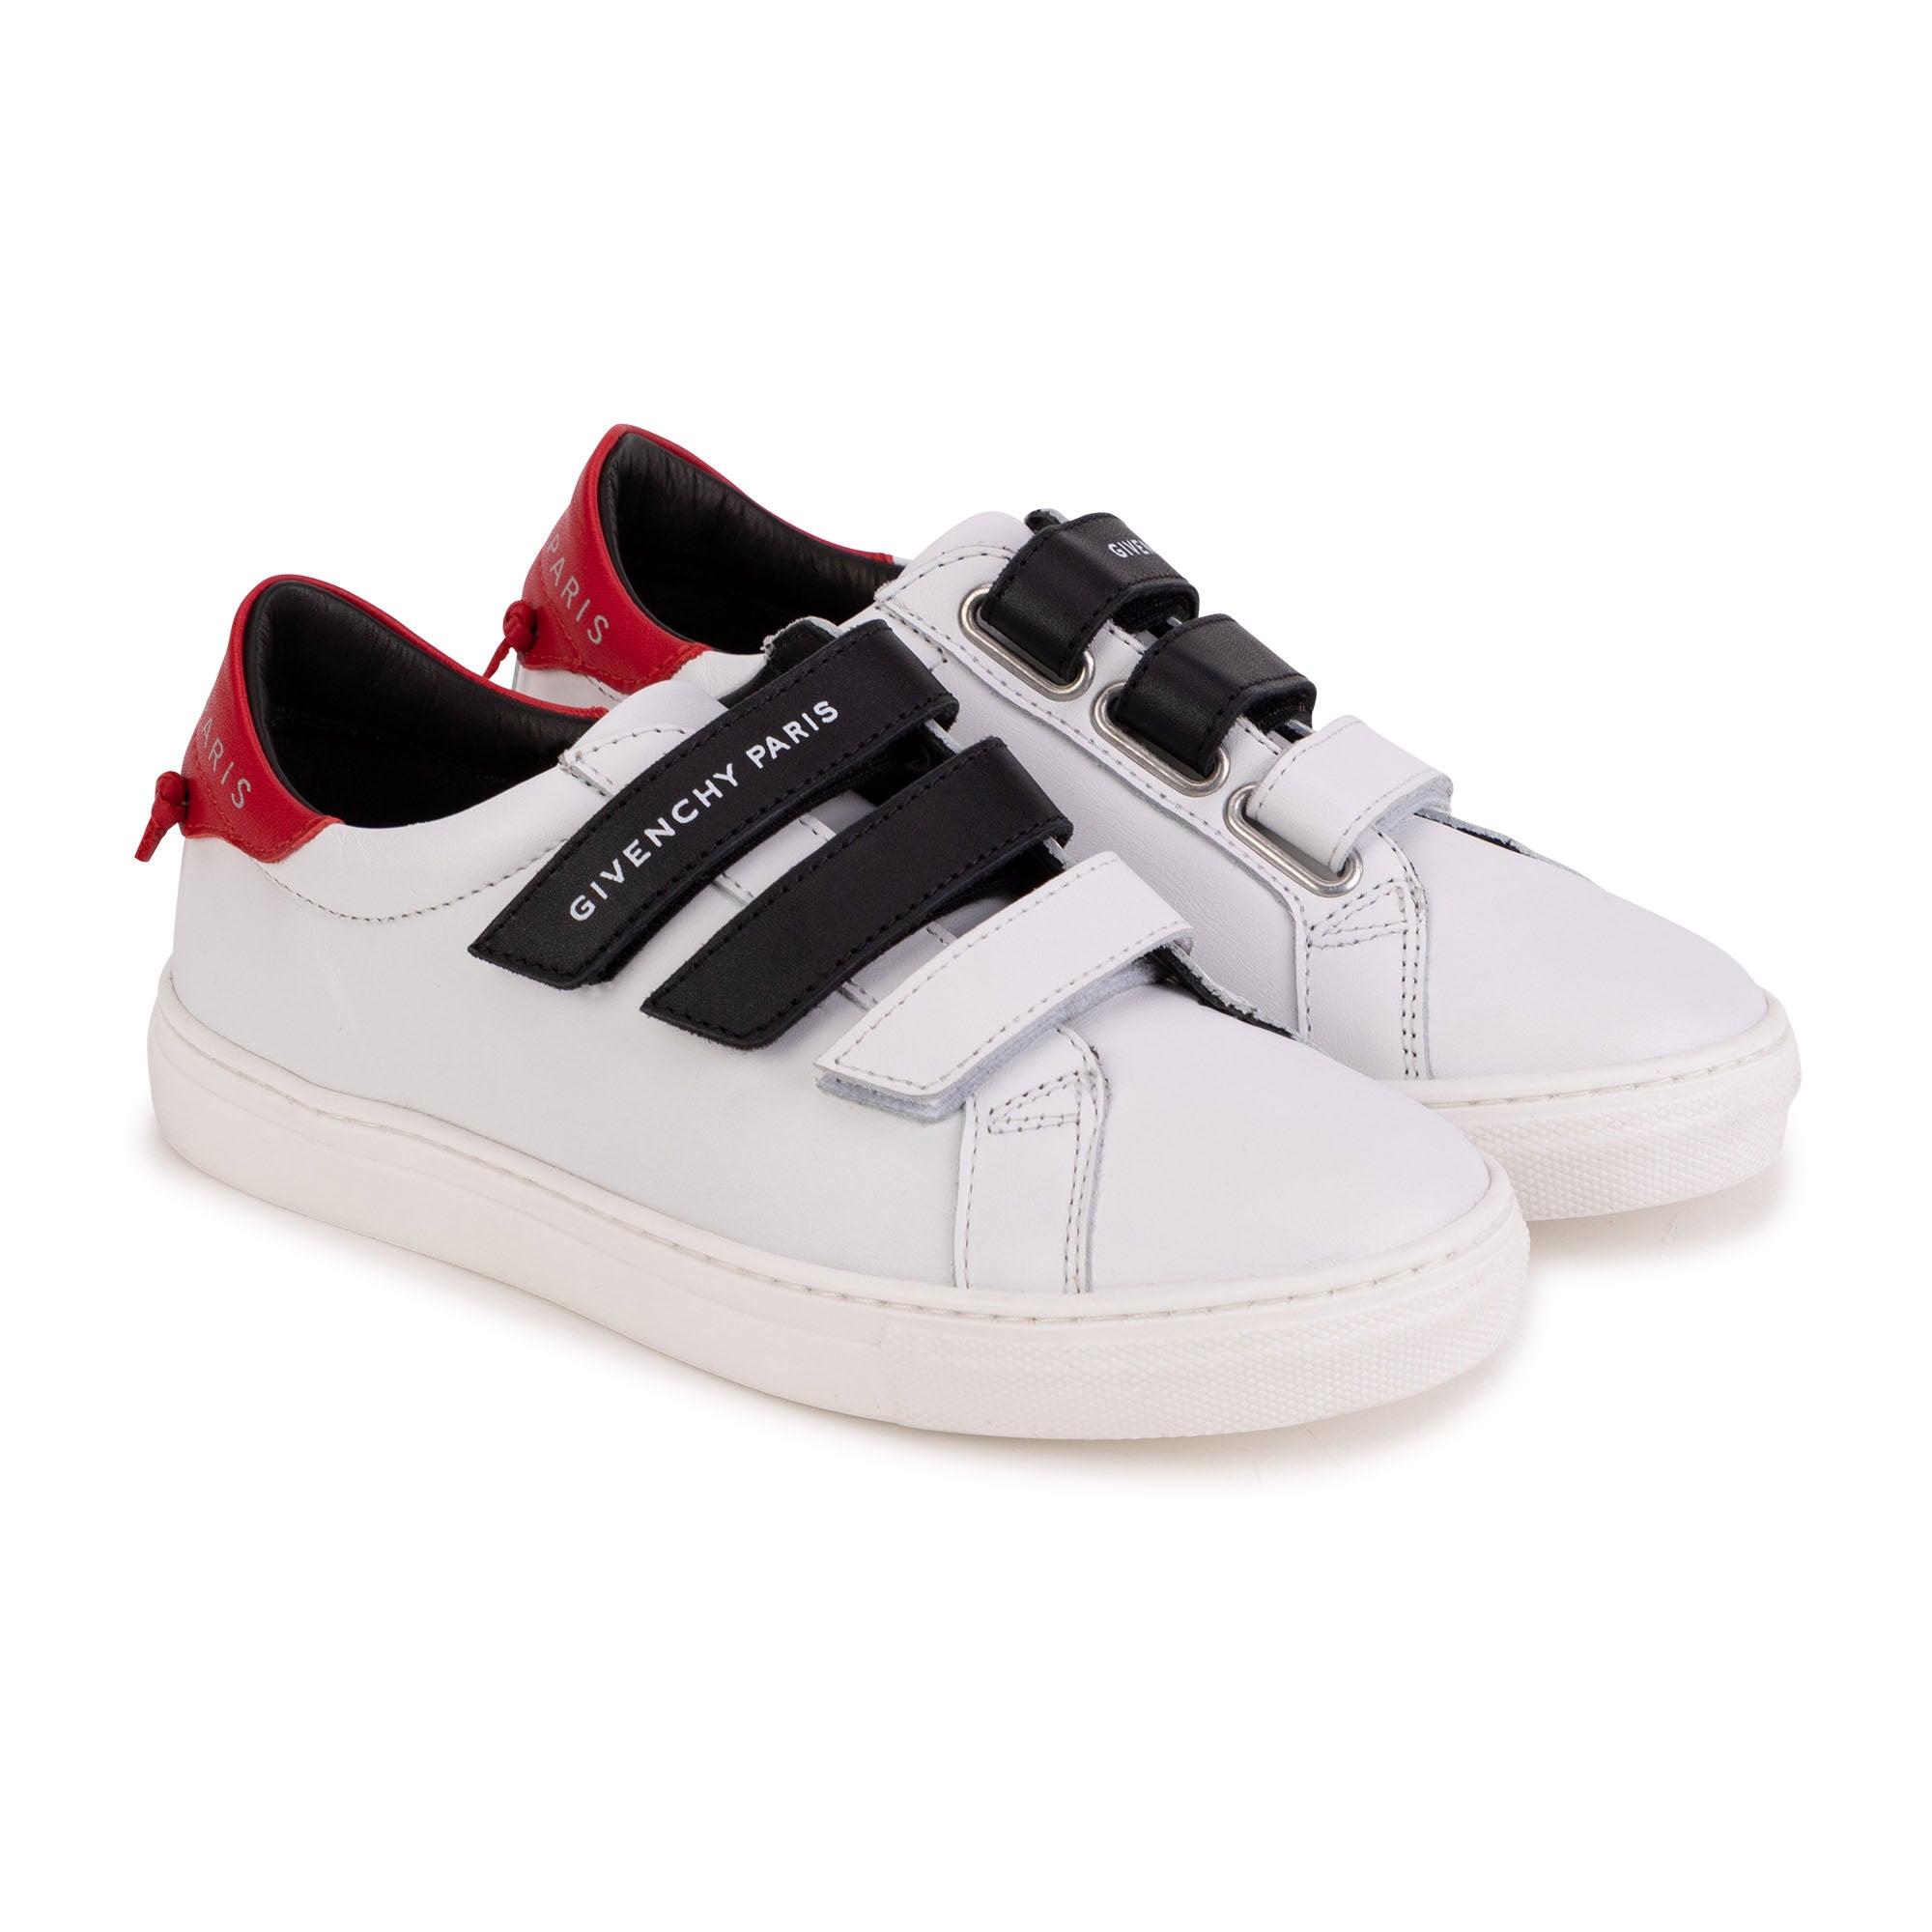 Boys White Leather Shoes